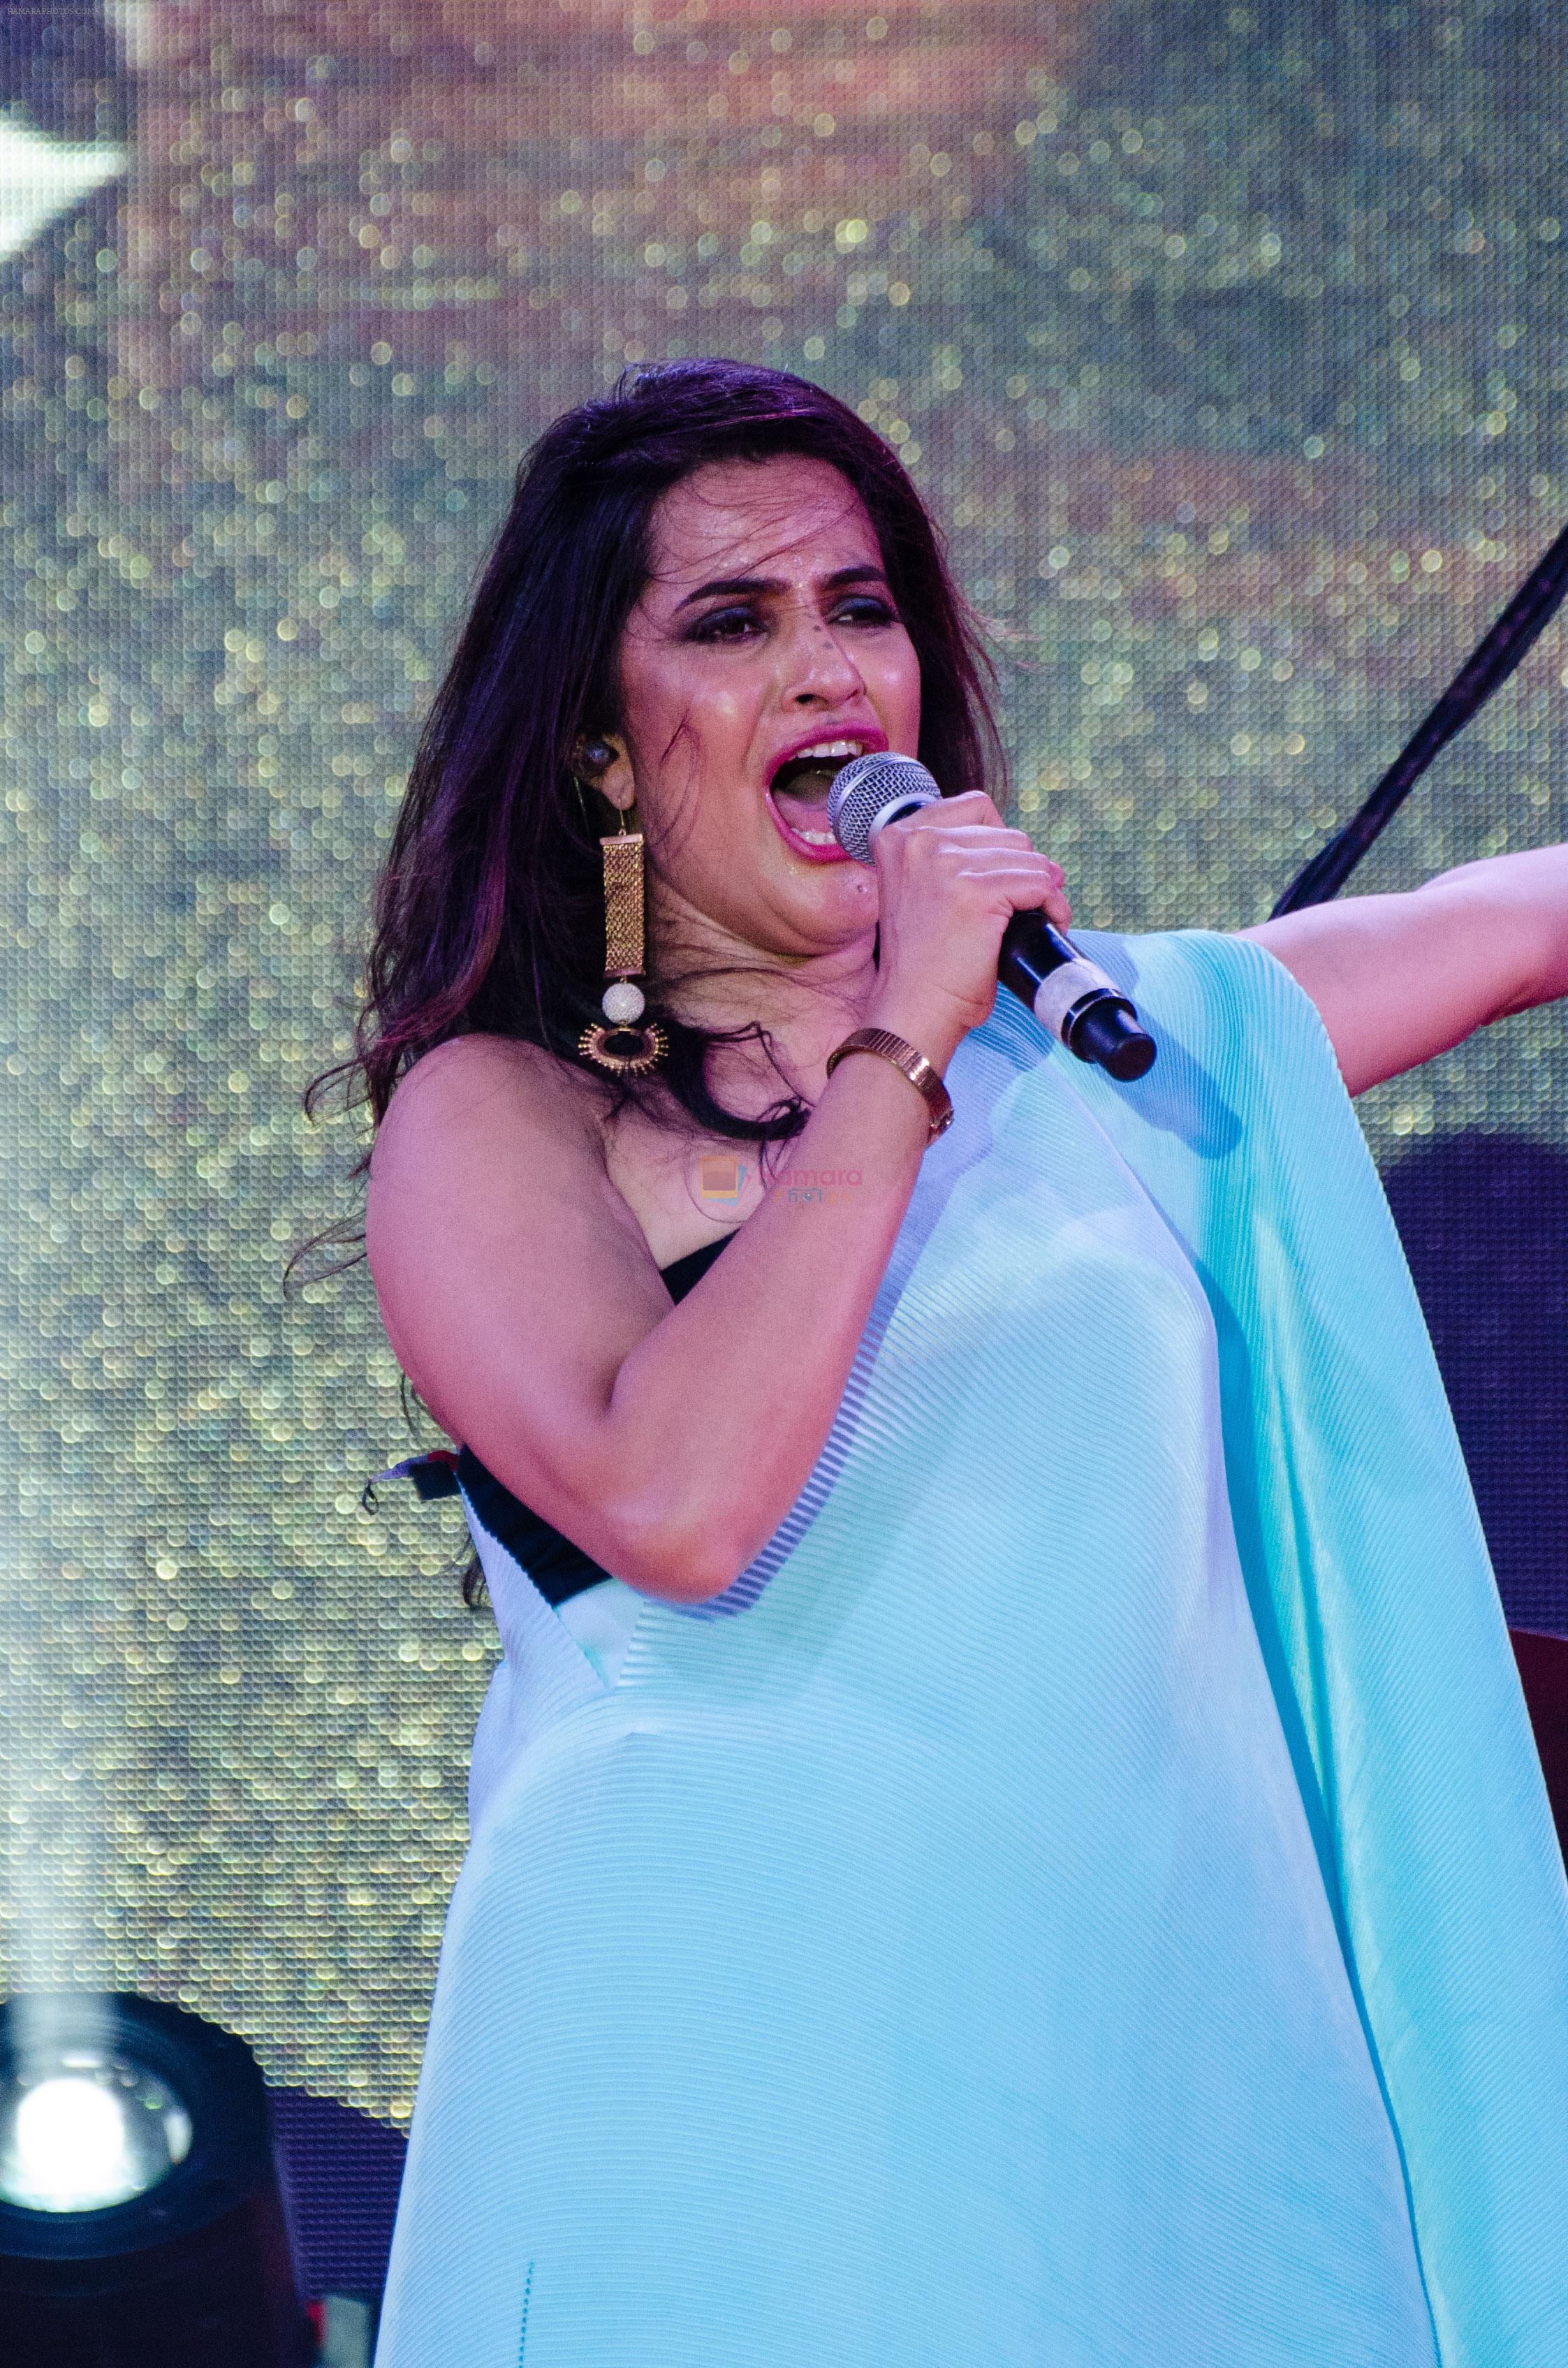 Sona Mohapatra's Concert at the TMTC grounds in Hyderabad on 26th Feb 2016